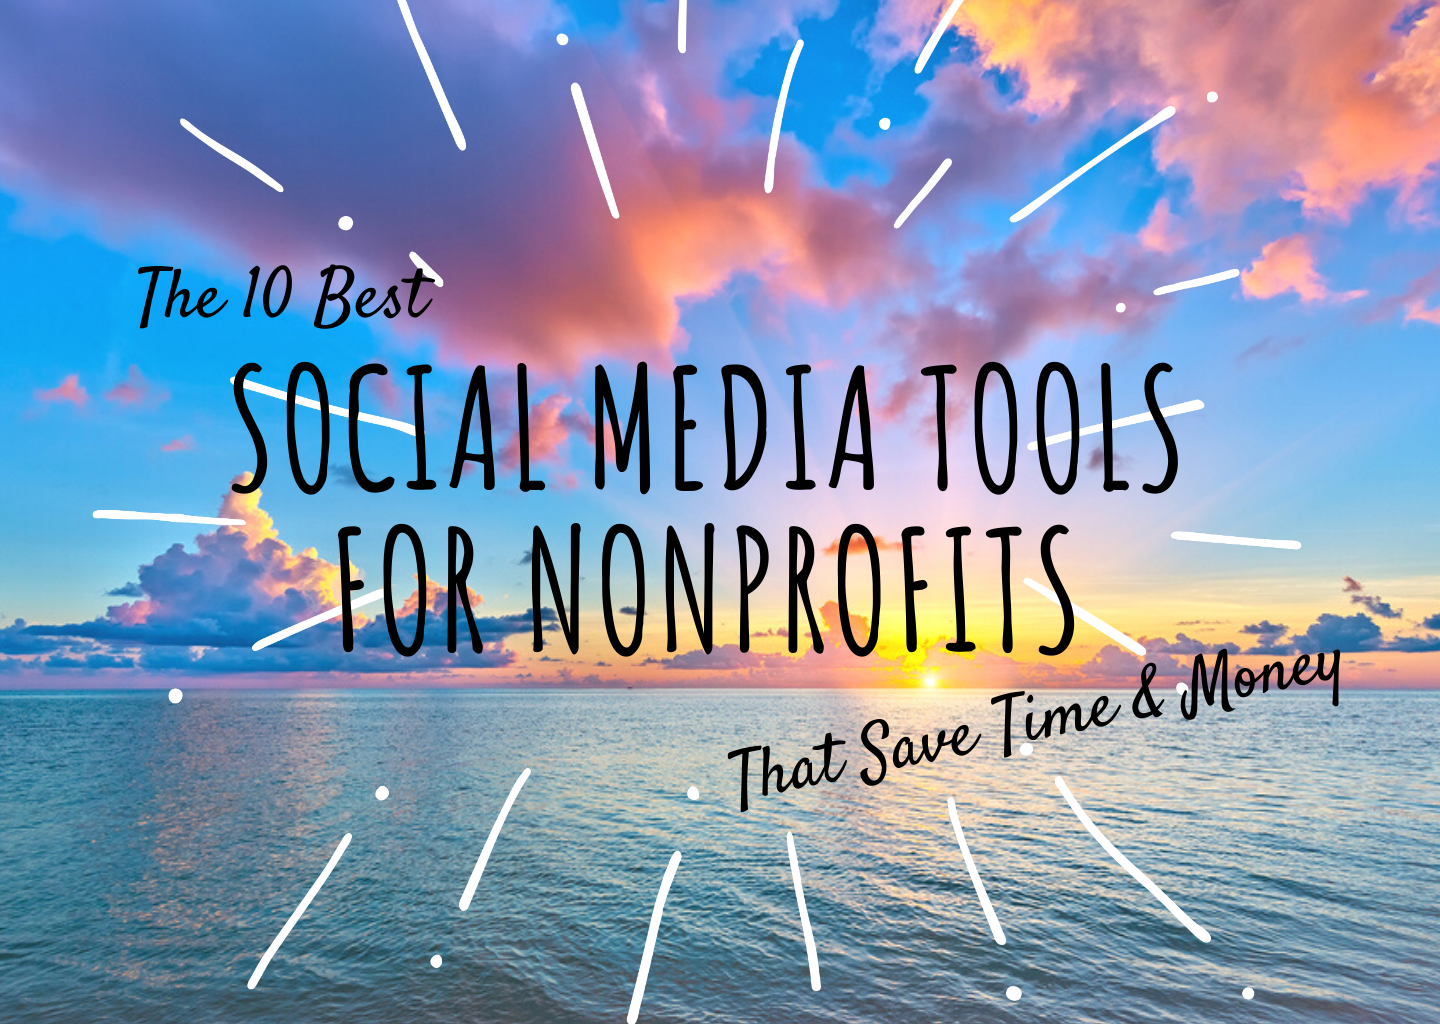 The Best Social Media Tools for Nonprofits in 2022